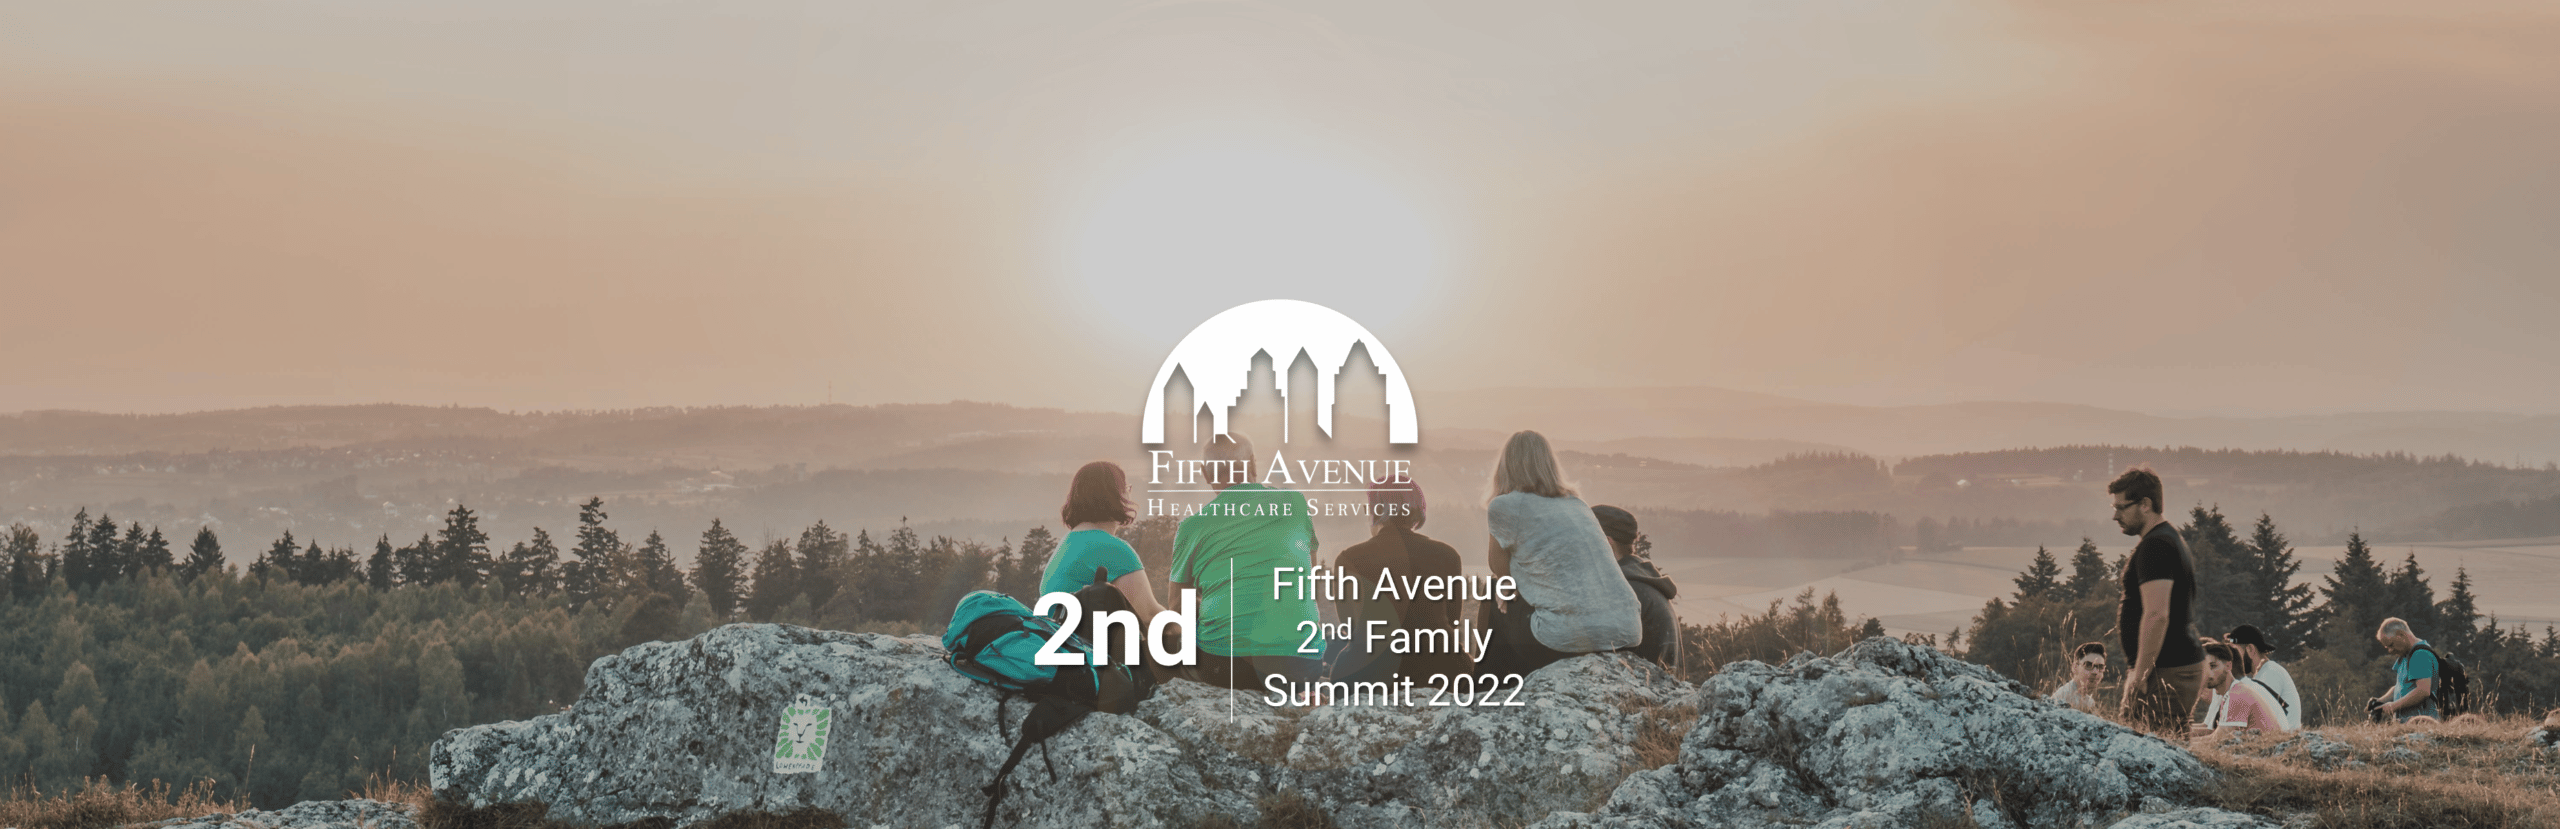 2nd Fifth Avenue Family Summit 2022